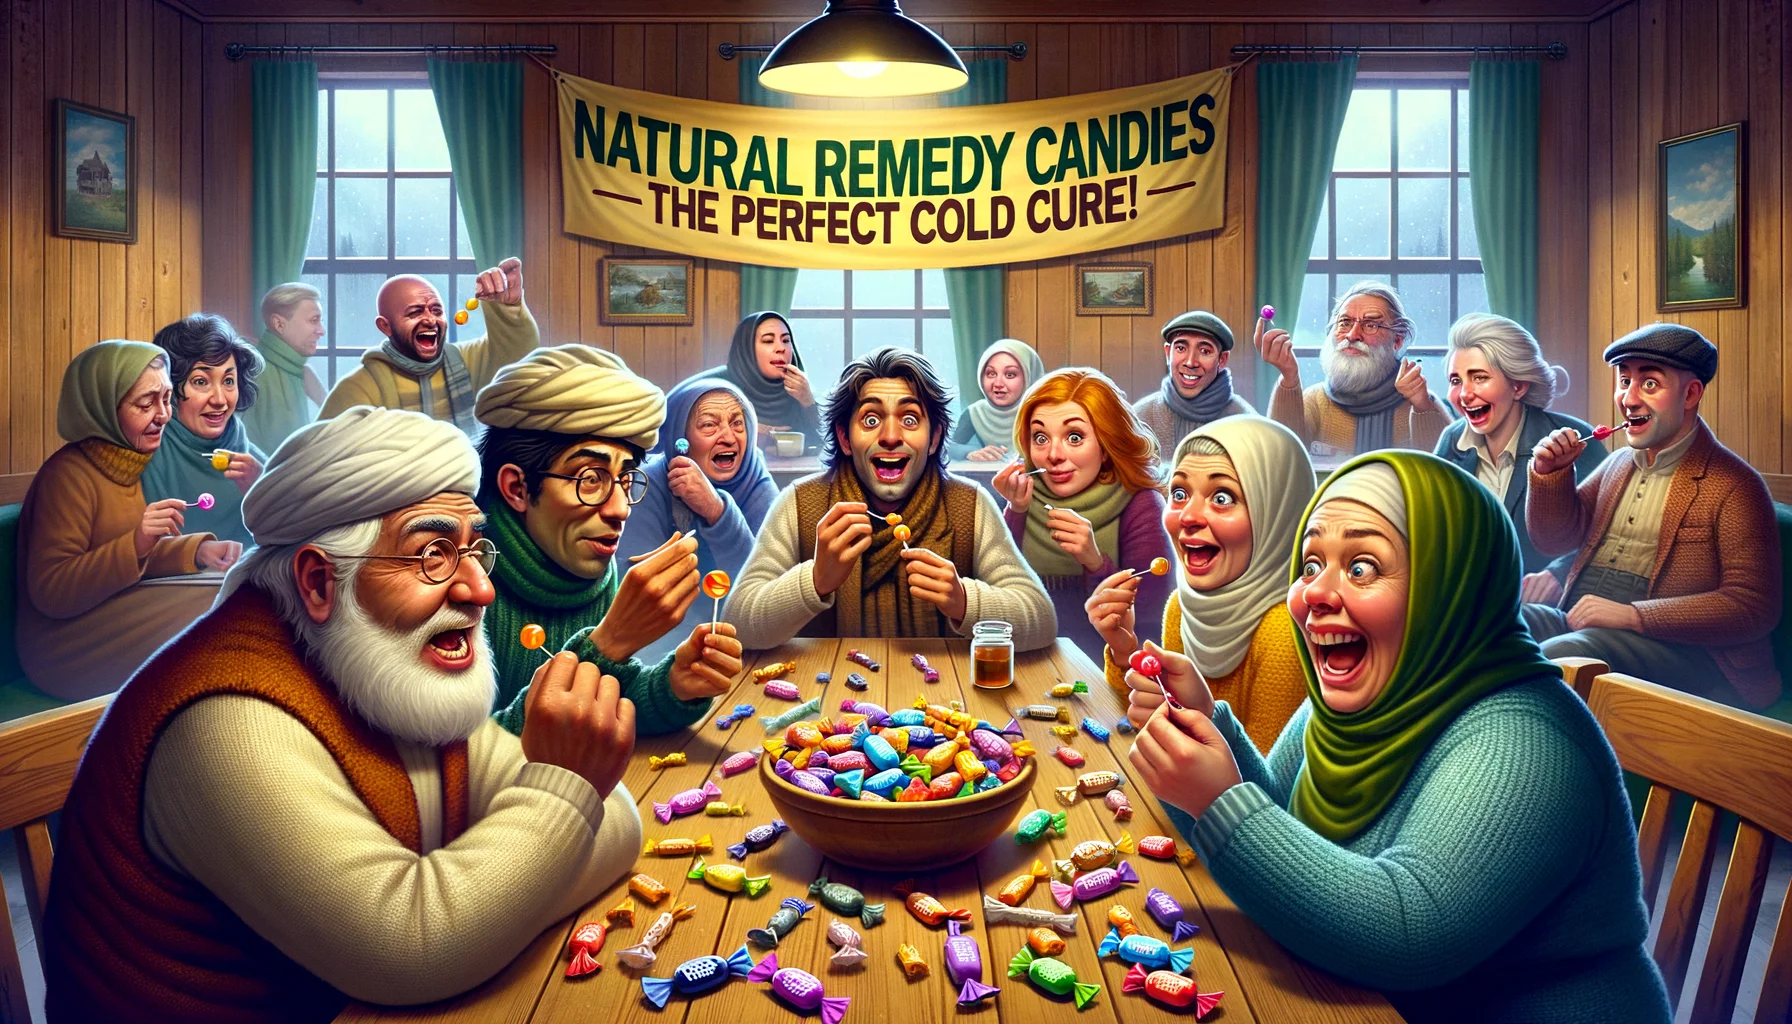 Create a detailed and funny yet realistic image depicting a whimsical situation where 'Natural Remedy Candies for Common Colds' are seen as the ultimate solution. A group of people with diverse genders and descents, including a Hispanic man, a Middle-Eastern woman, a South Asian man, and a Caucasian woman, are sat around a wooden table. They have a variety of funny facial expressions ranging from surprised to overjoyed, reflecting their relief from cold symptoms. The scene is very colourful, with the candies being in all sorts of exciting shapes and bright colours, scattered on the table and in their hands. A banner hangs above them, reading 'Natural Remedy Candies - The Perfect Cold Cure!' The room is warm and cozy, filled with soft lighting from a roaring fireplace, adding to the feeling of comfort and healing.